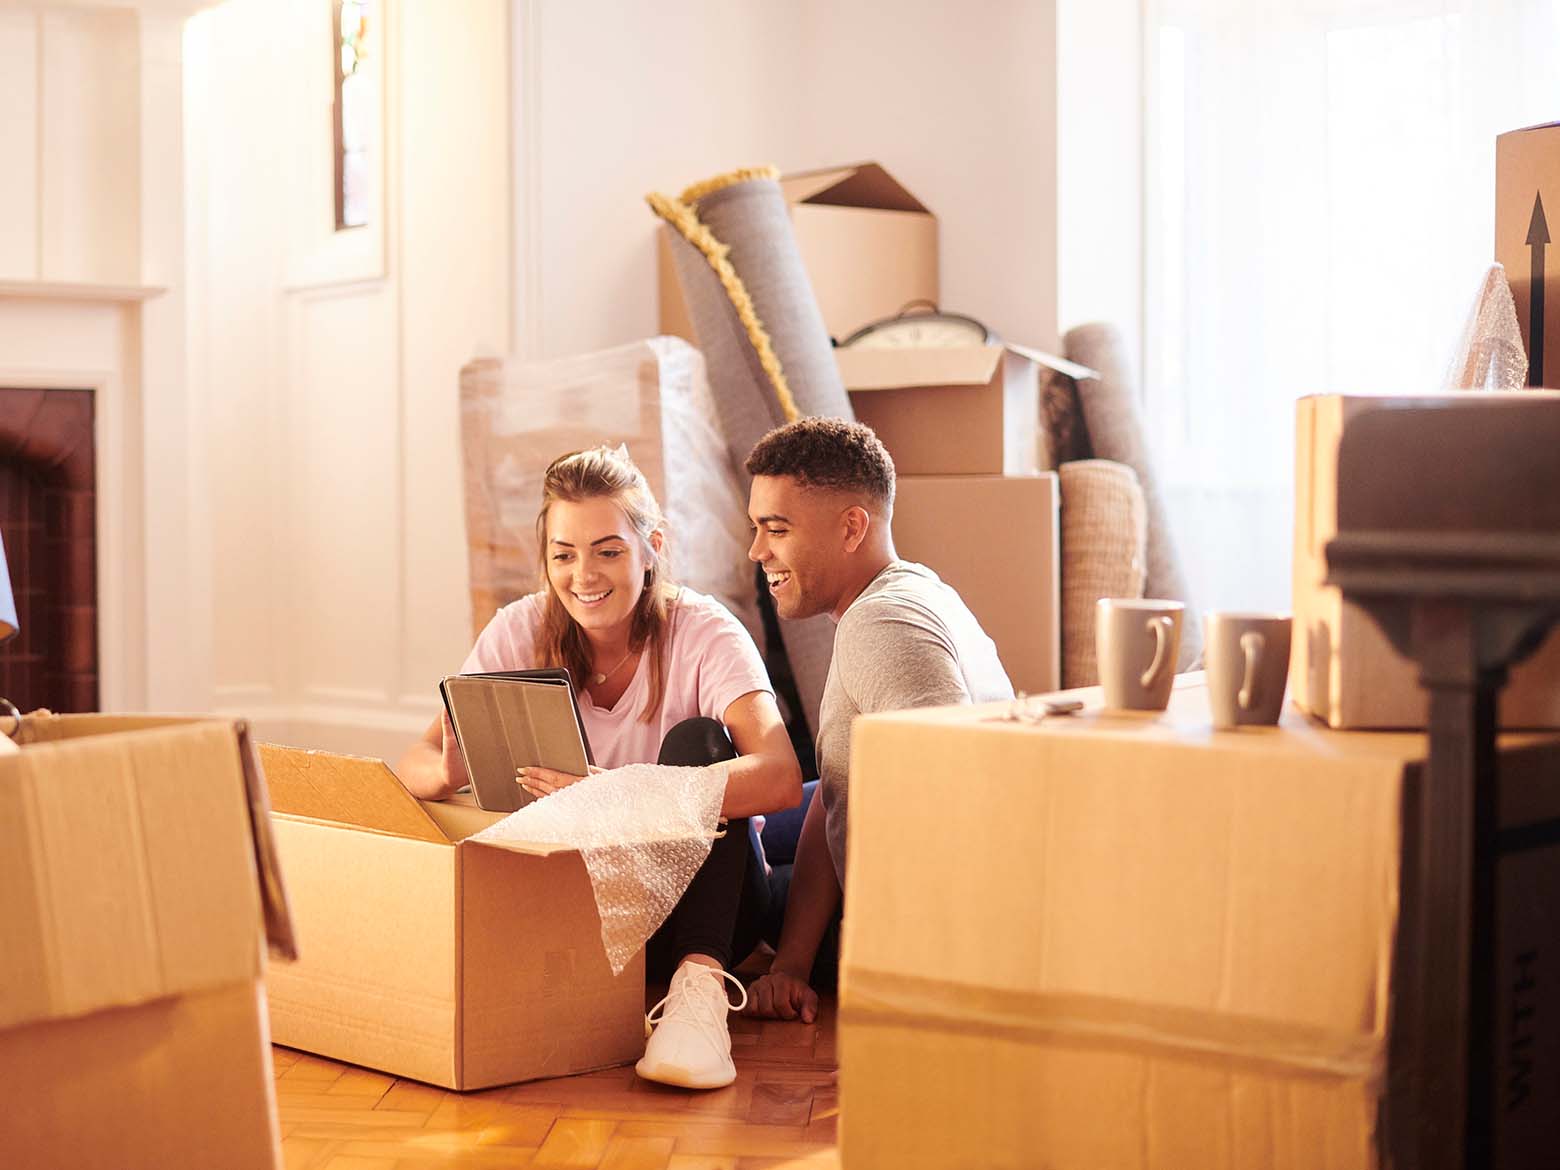 A young couple sits on the floor of their living room to unpack moving boxes